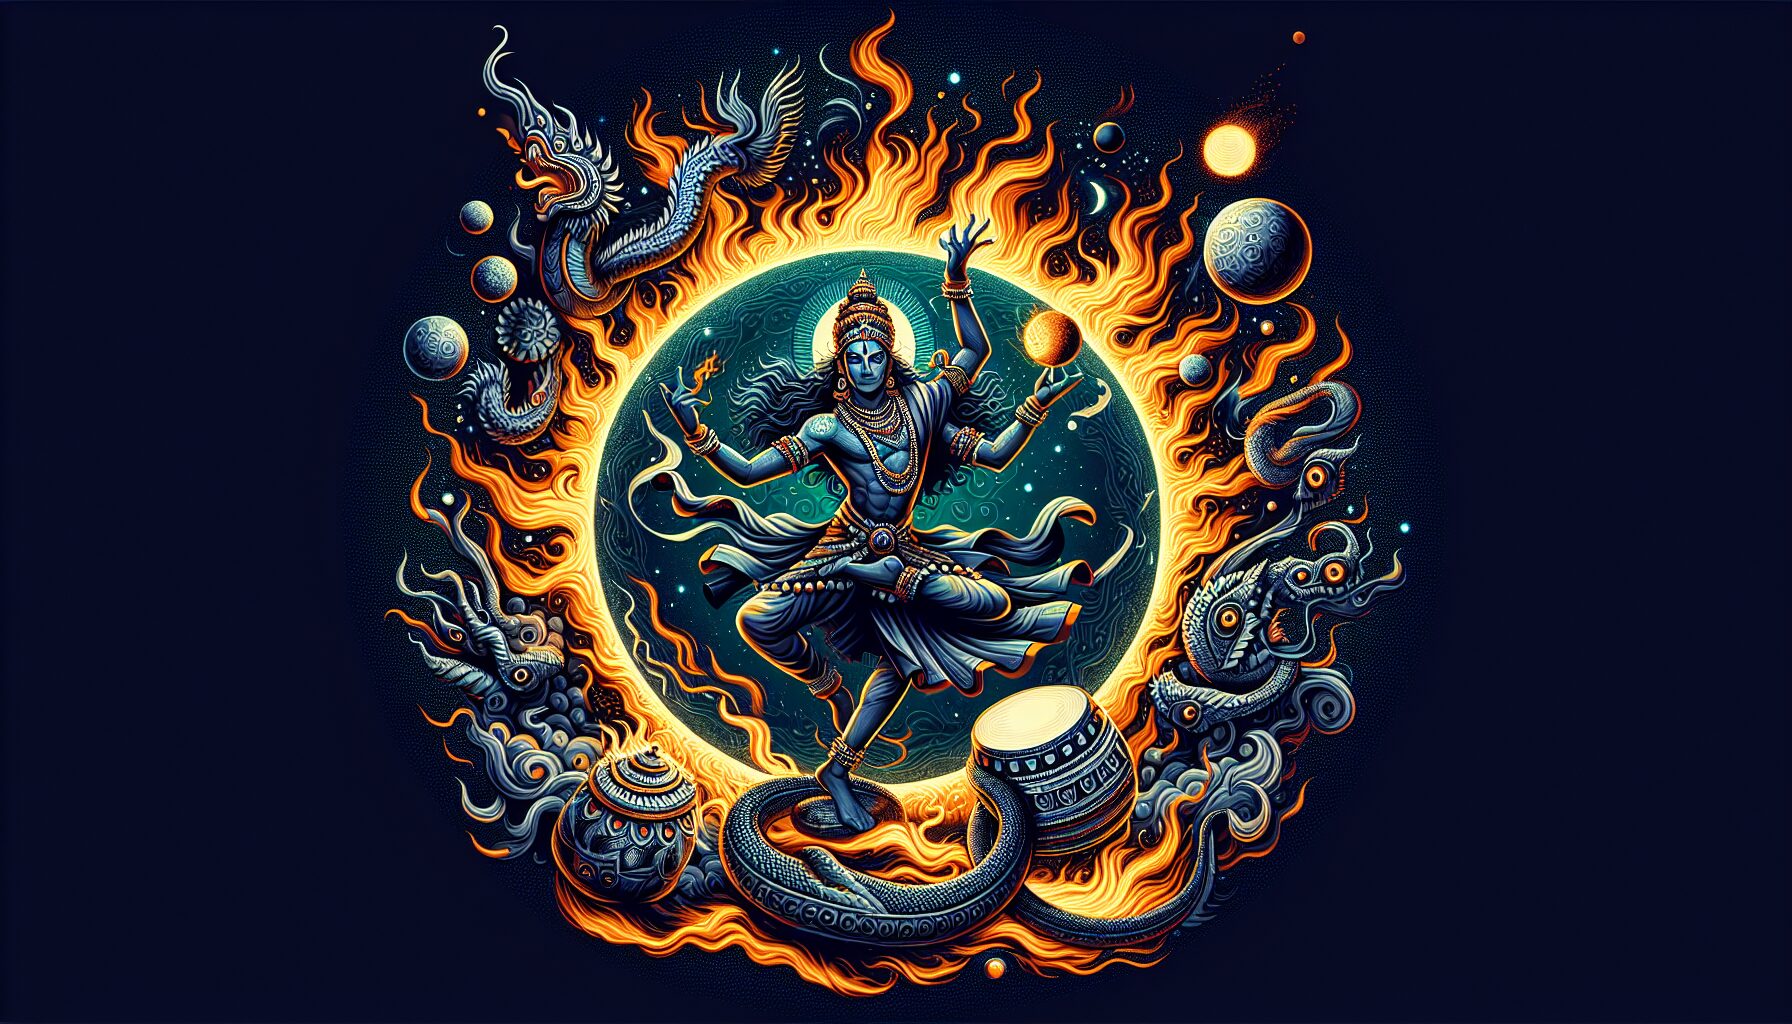 What Is The Story Behind The Cosmic Dance Of Nataraja?